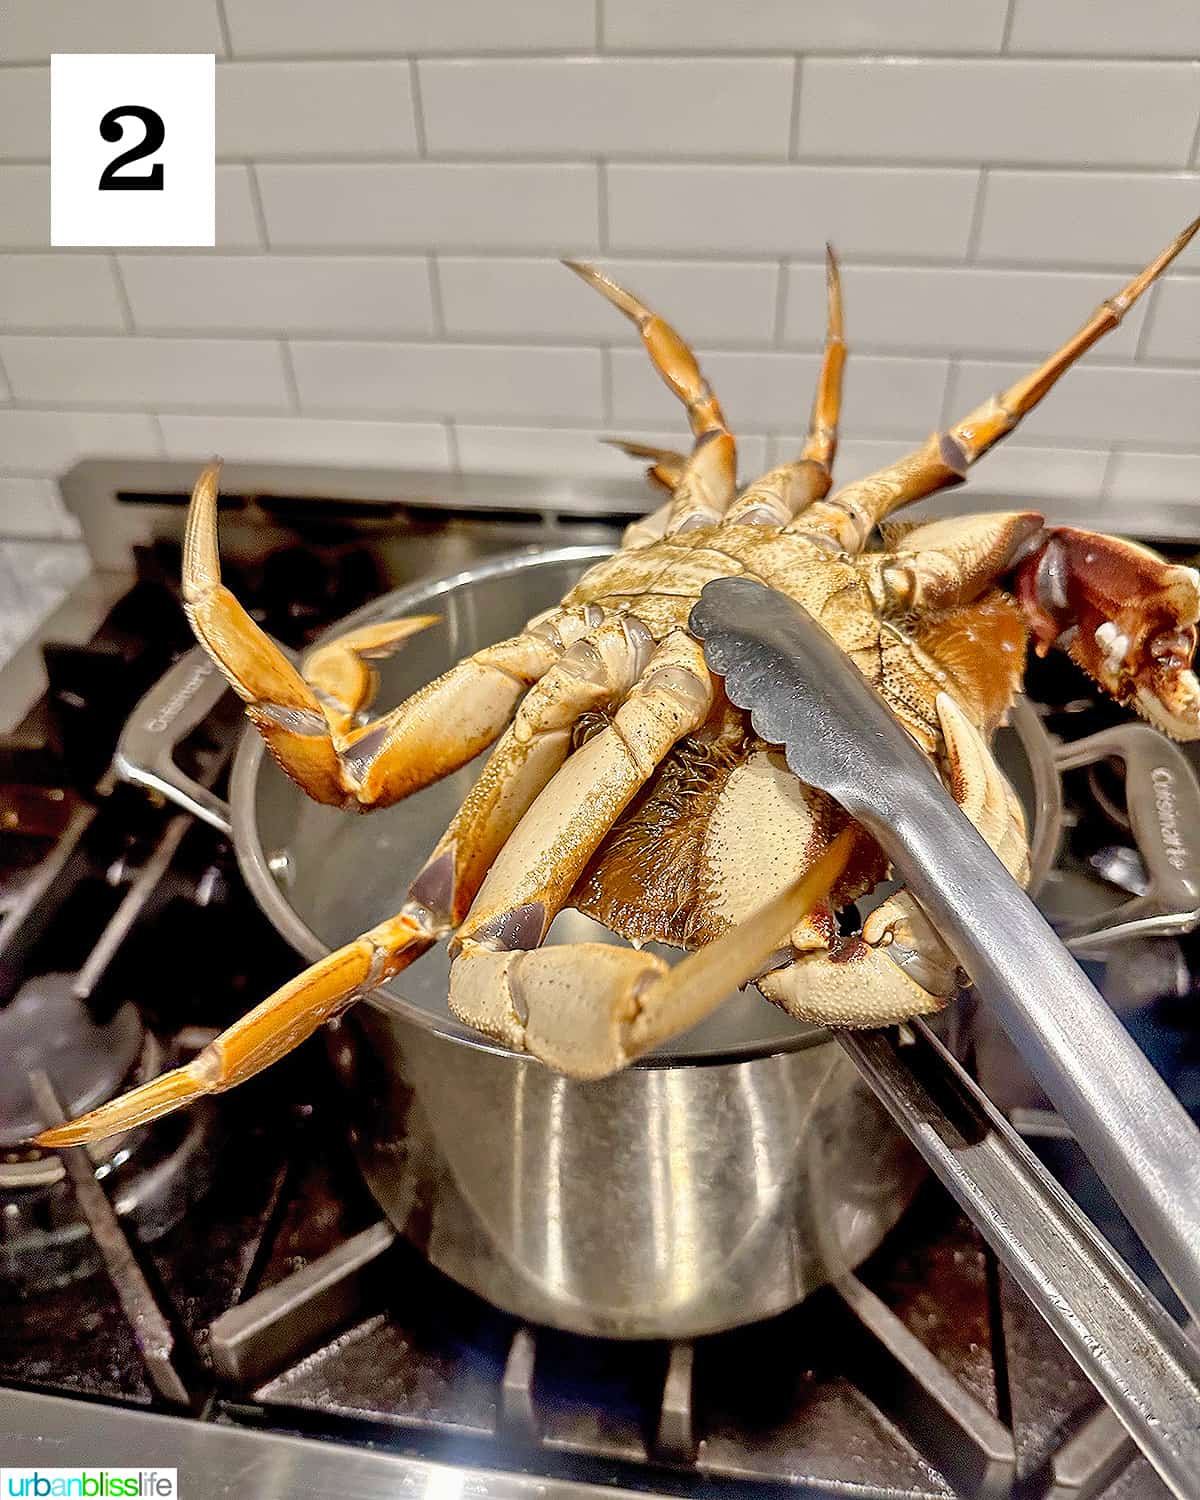 tongs holding a Dungeness crab over a large pot of water to boil the crab.